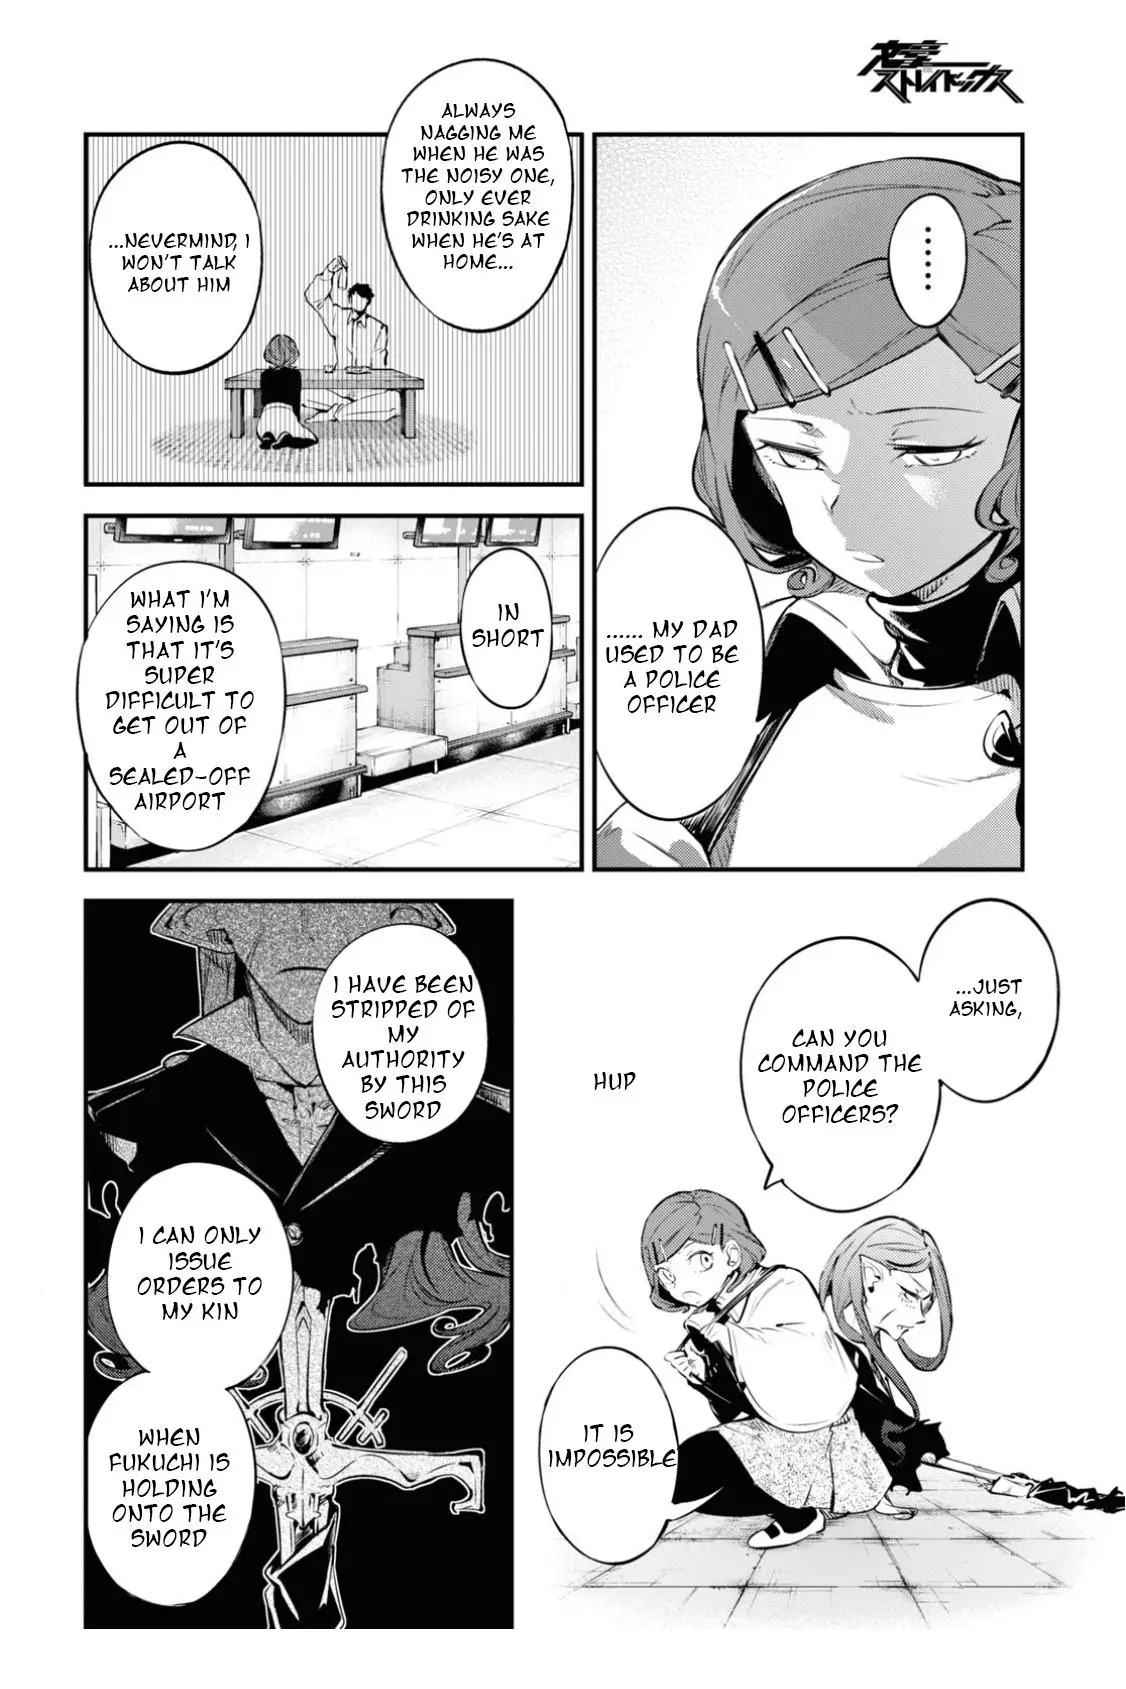 Bungou Stray Dogs - 98 page 3-e10afc0f